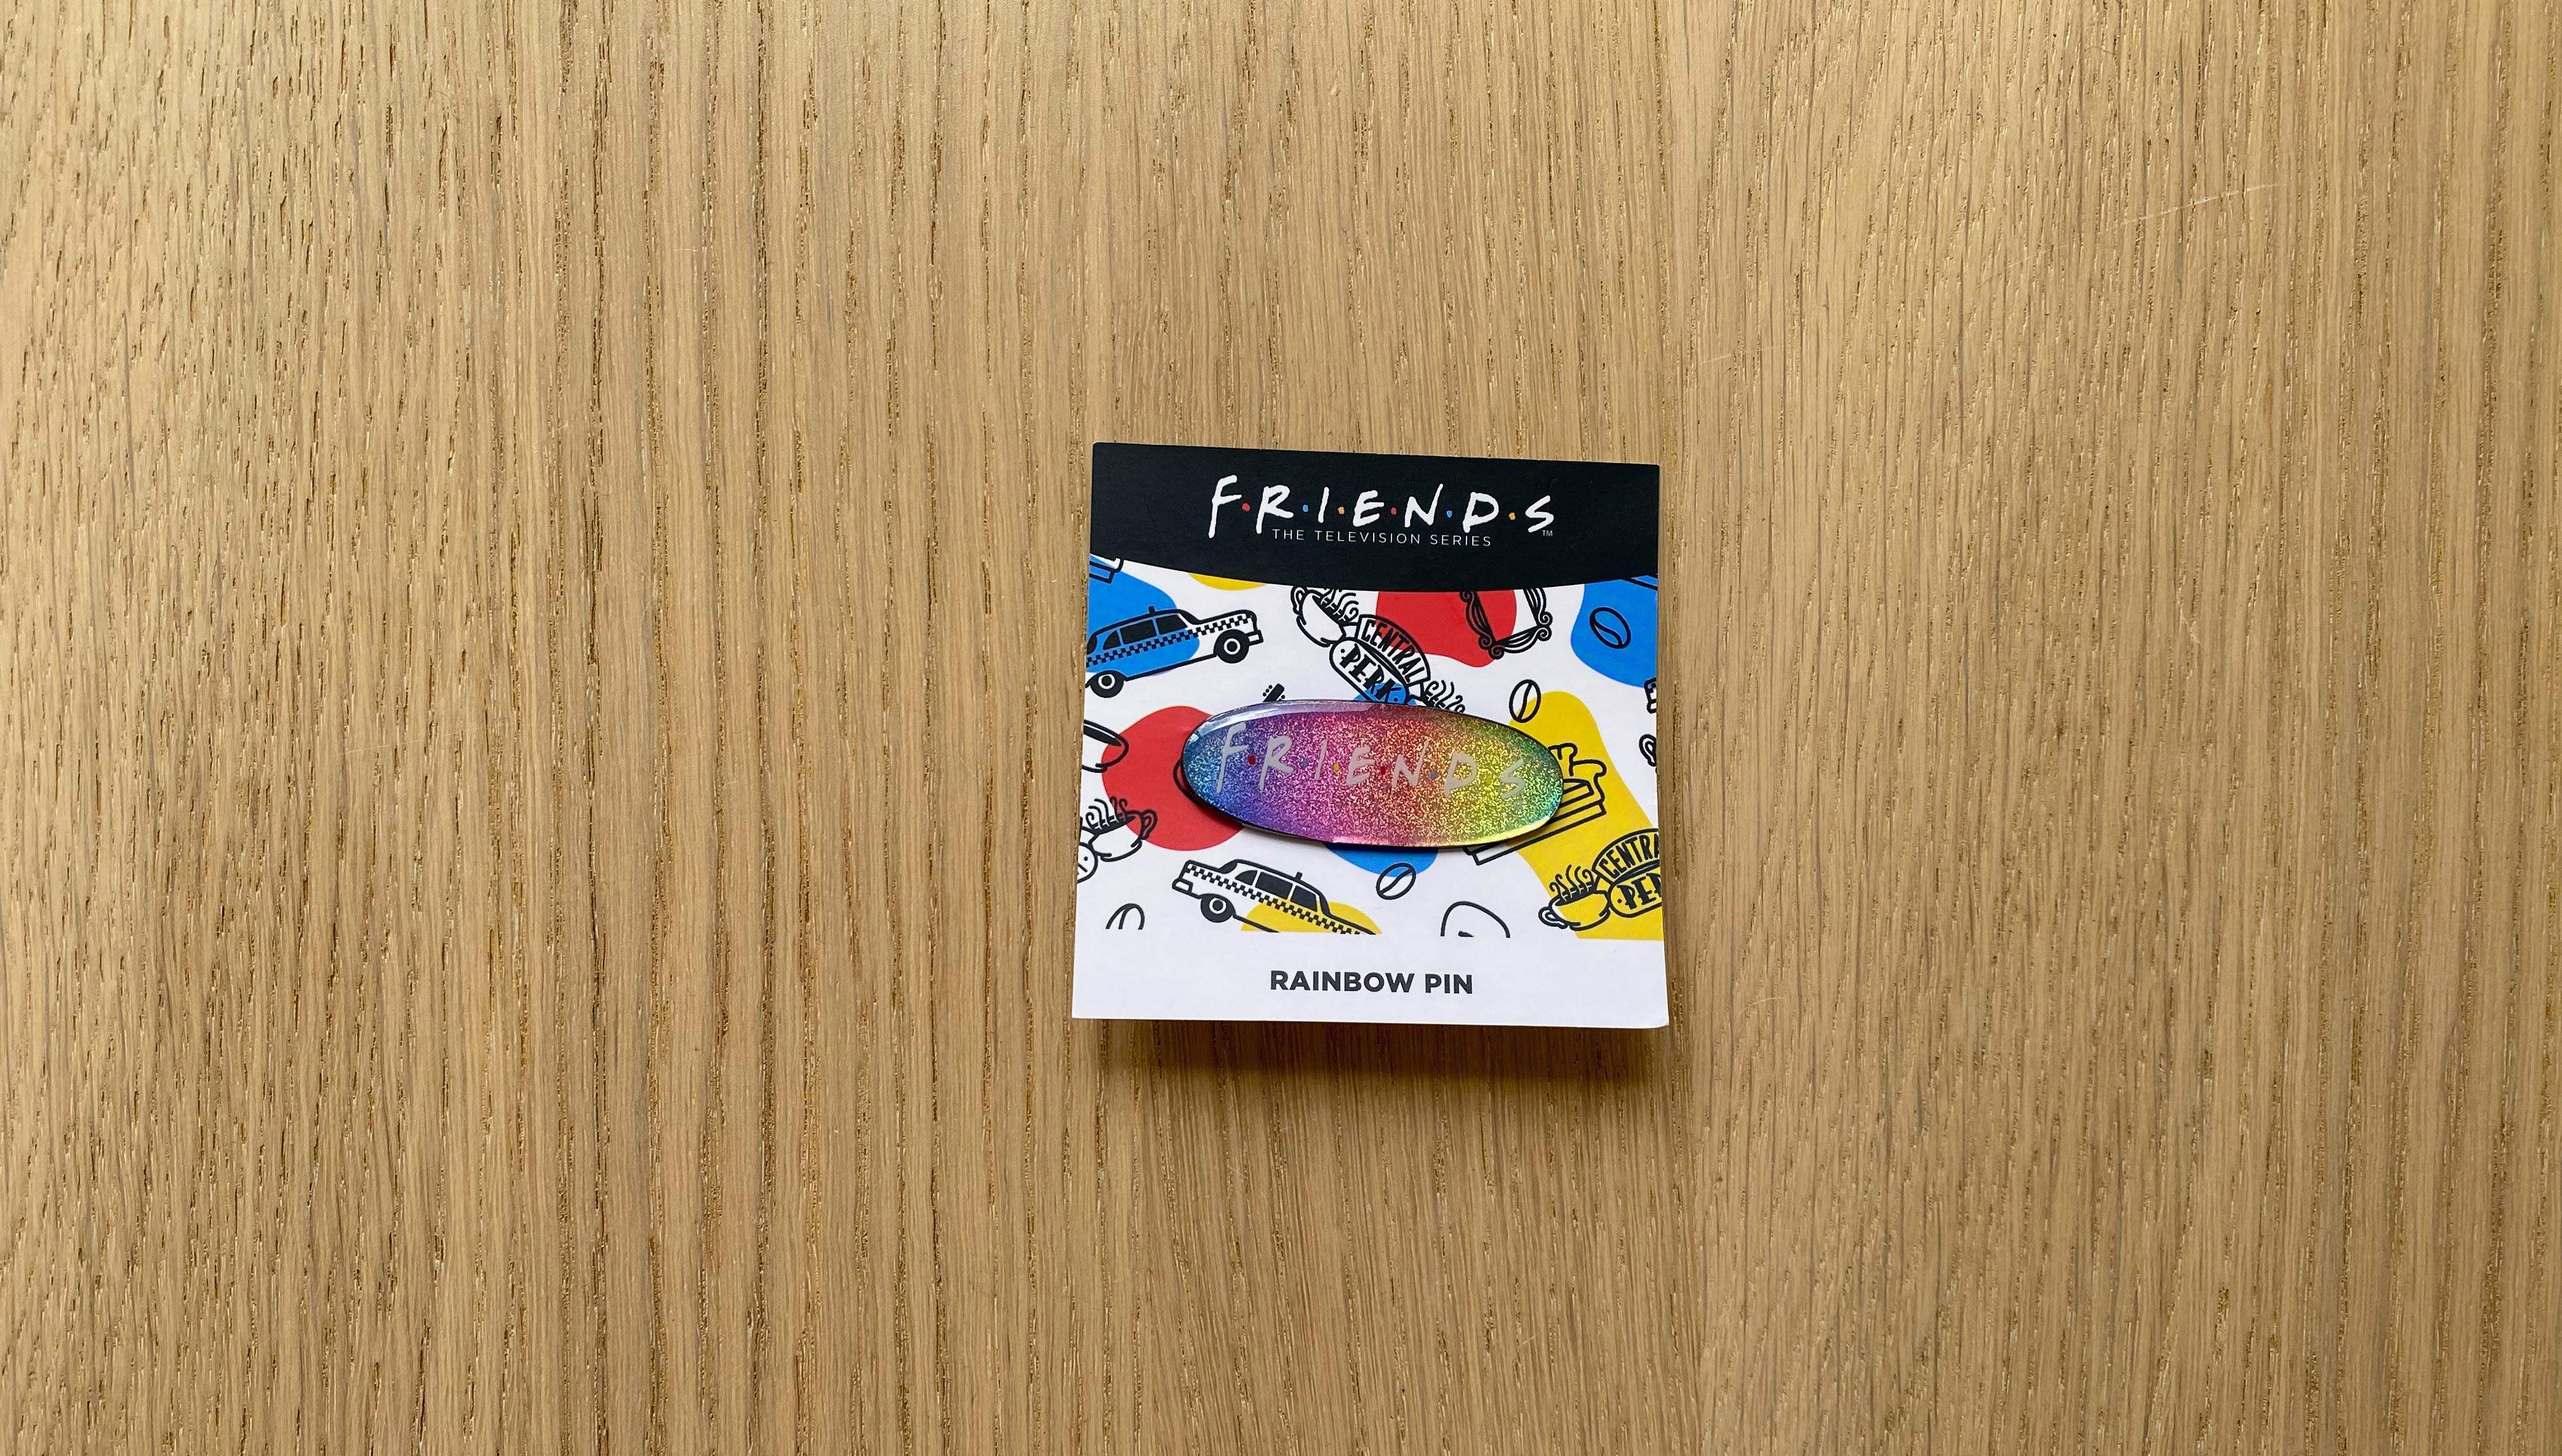 rainbow pin with the friends logo